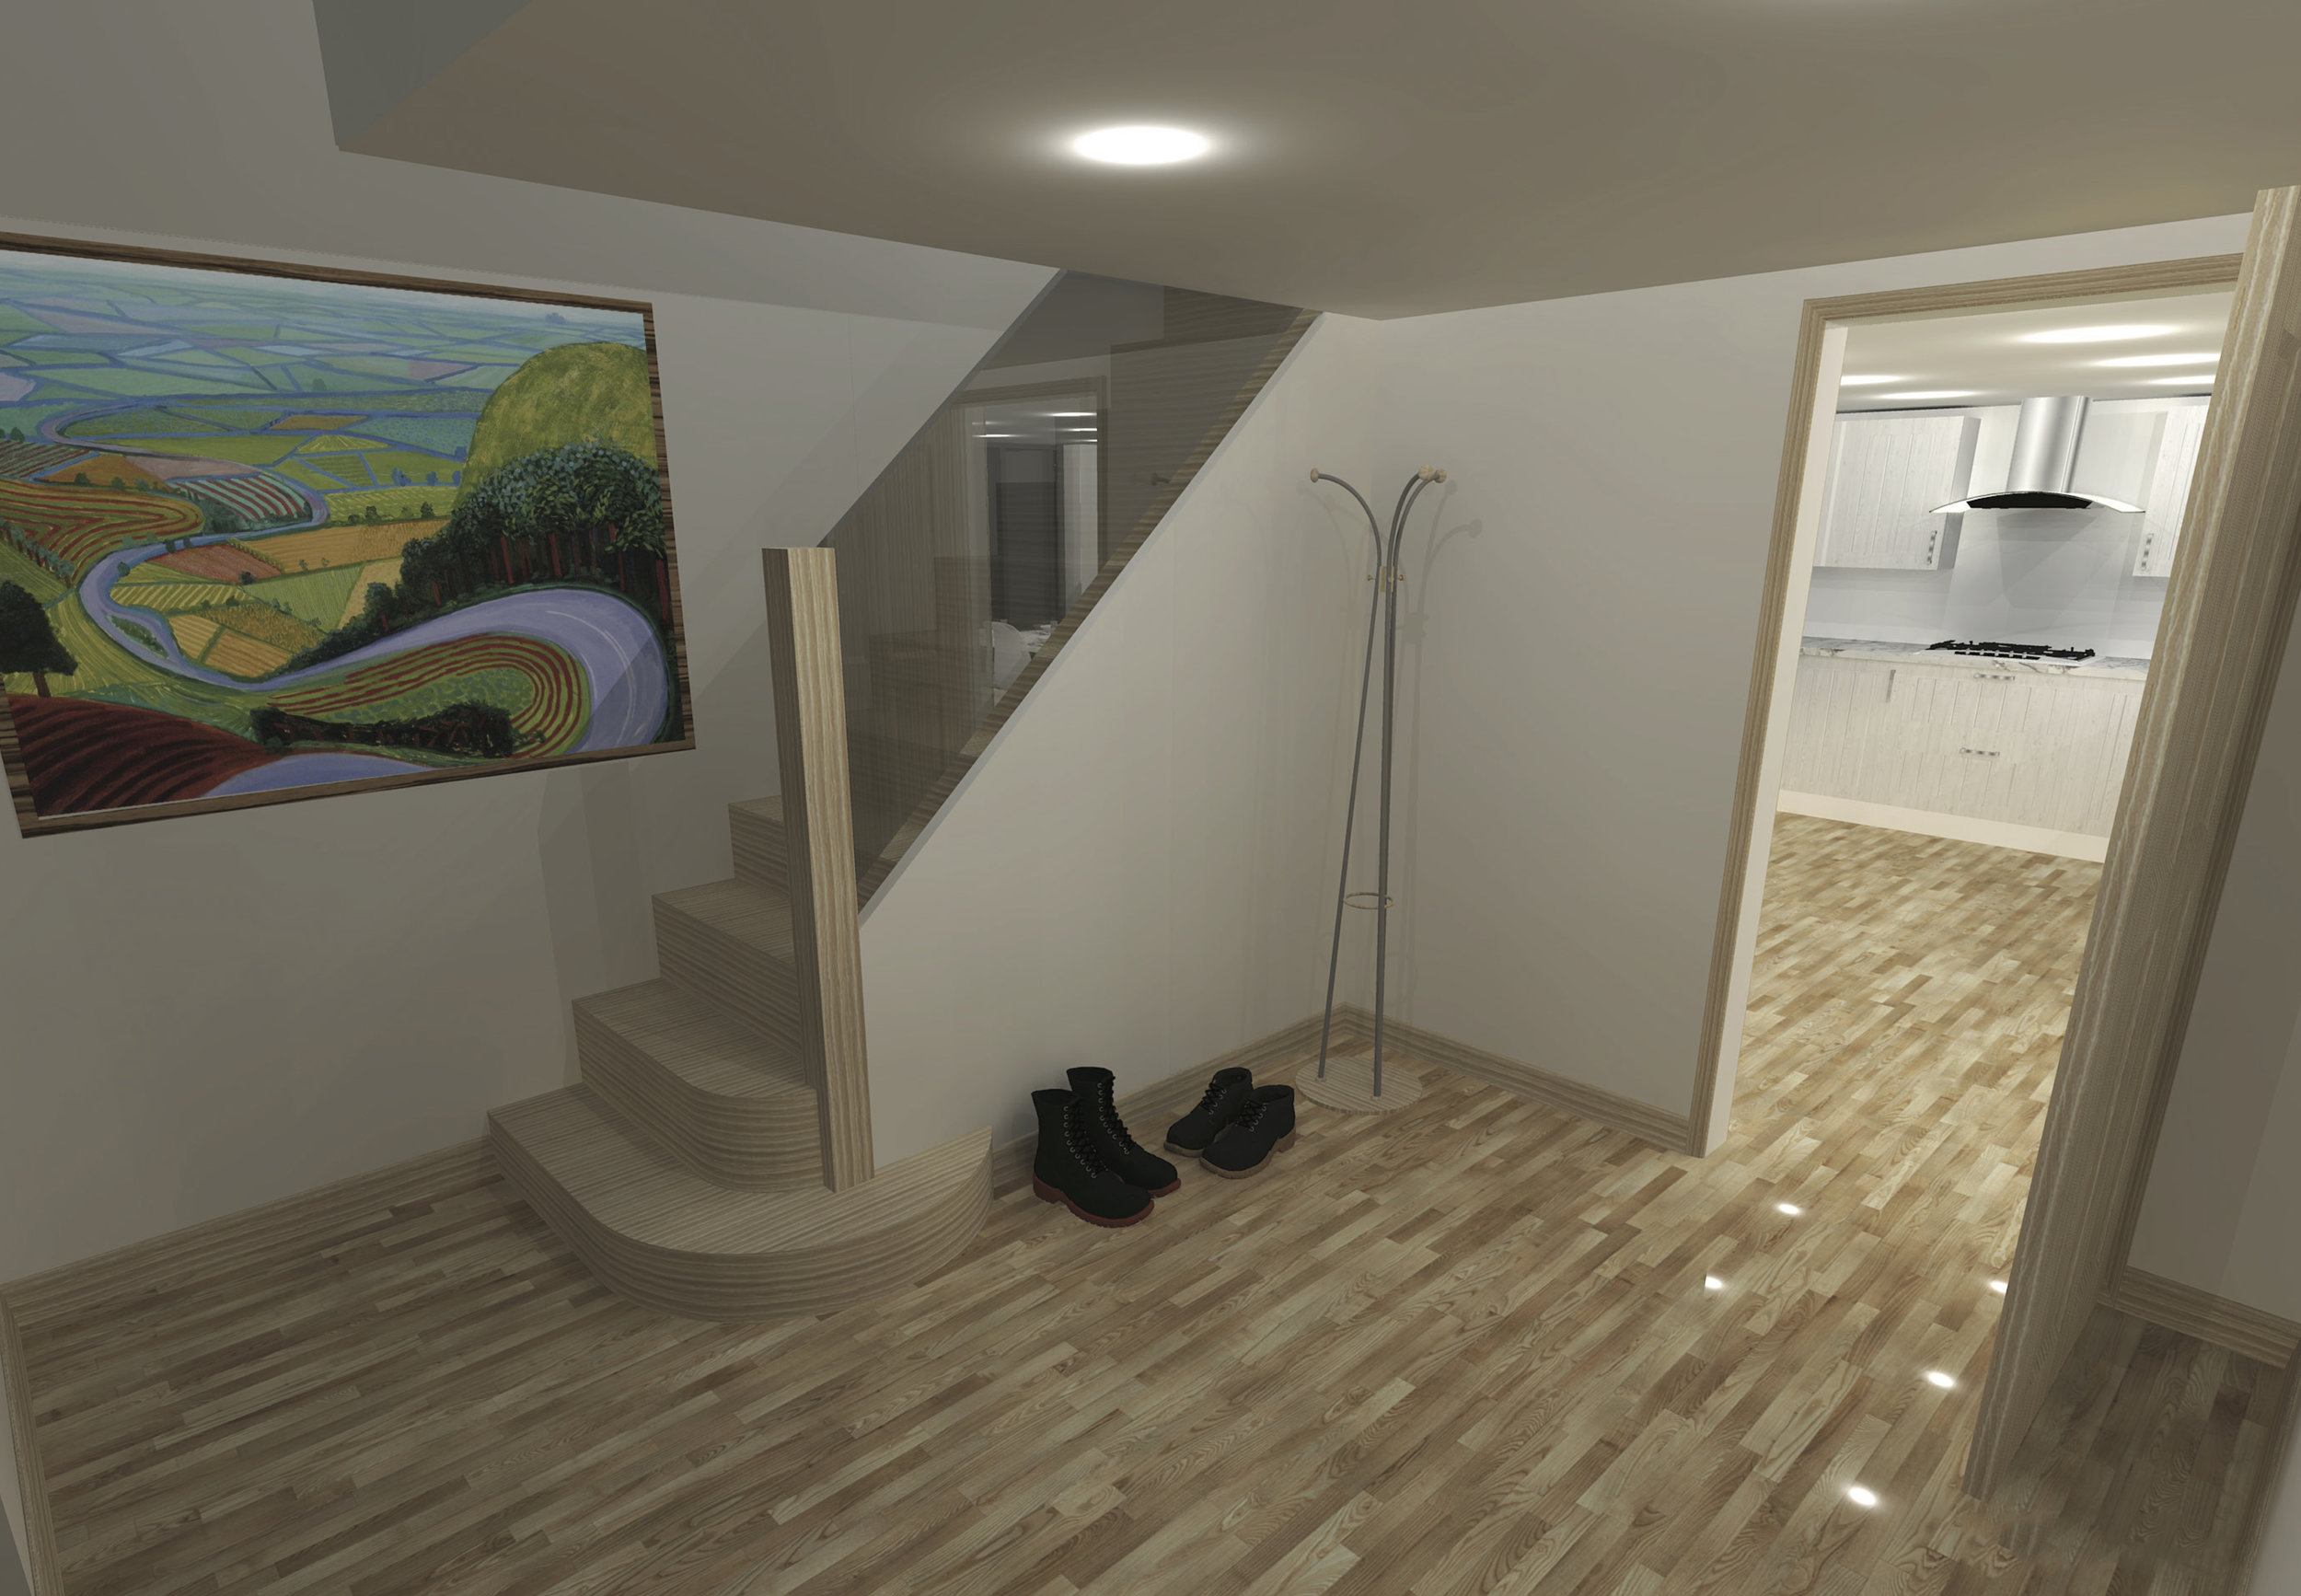 Proposed Foyer - Catfoss House - East Yorkshire Architects - Samuel Kendall Associates